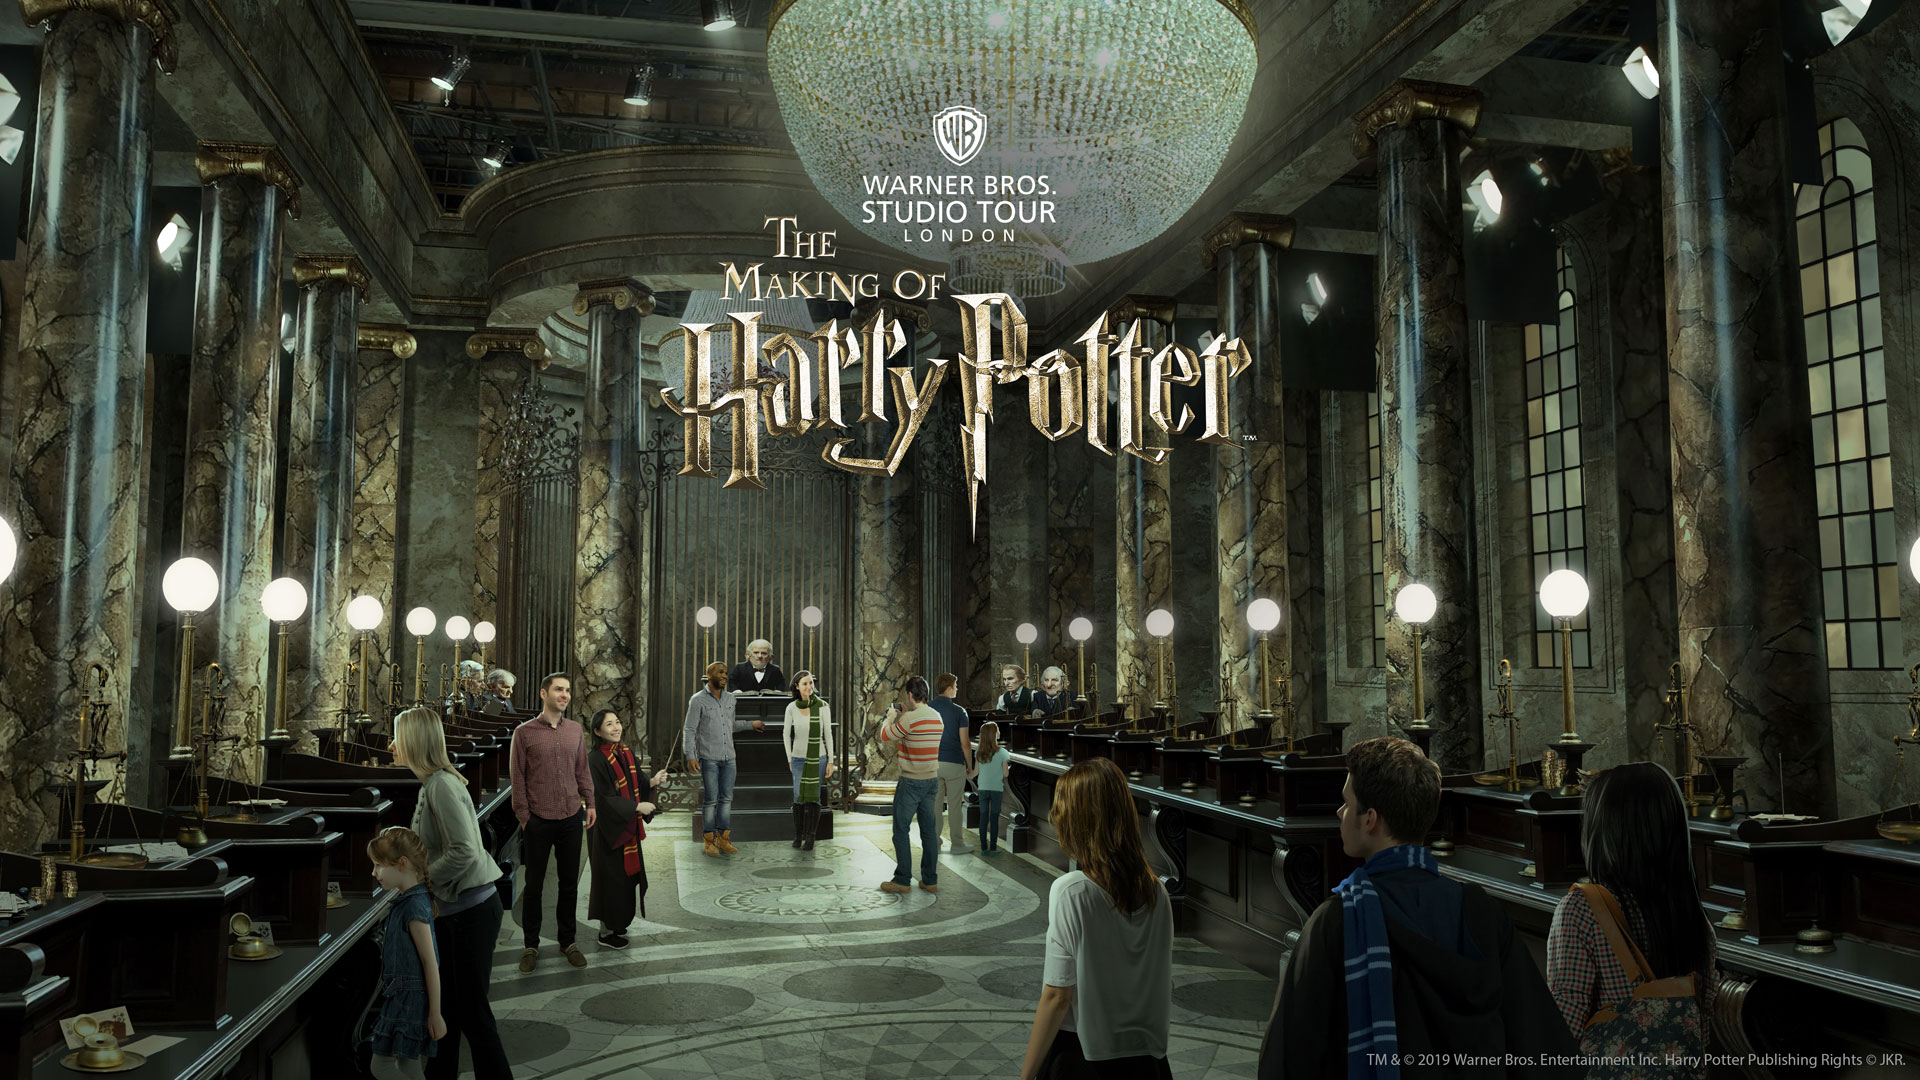 Fire breaks out Wednesday at Warner Bros Studios in London where Harry Potter was filmed